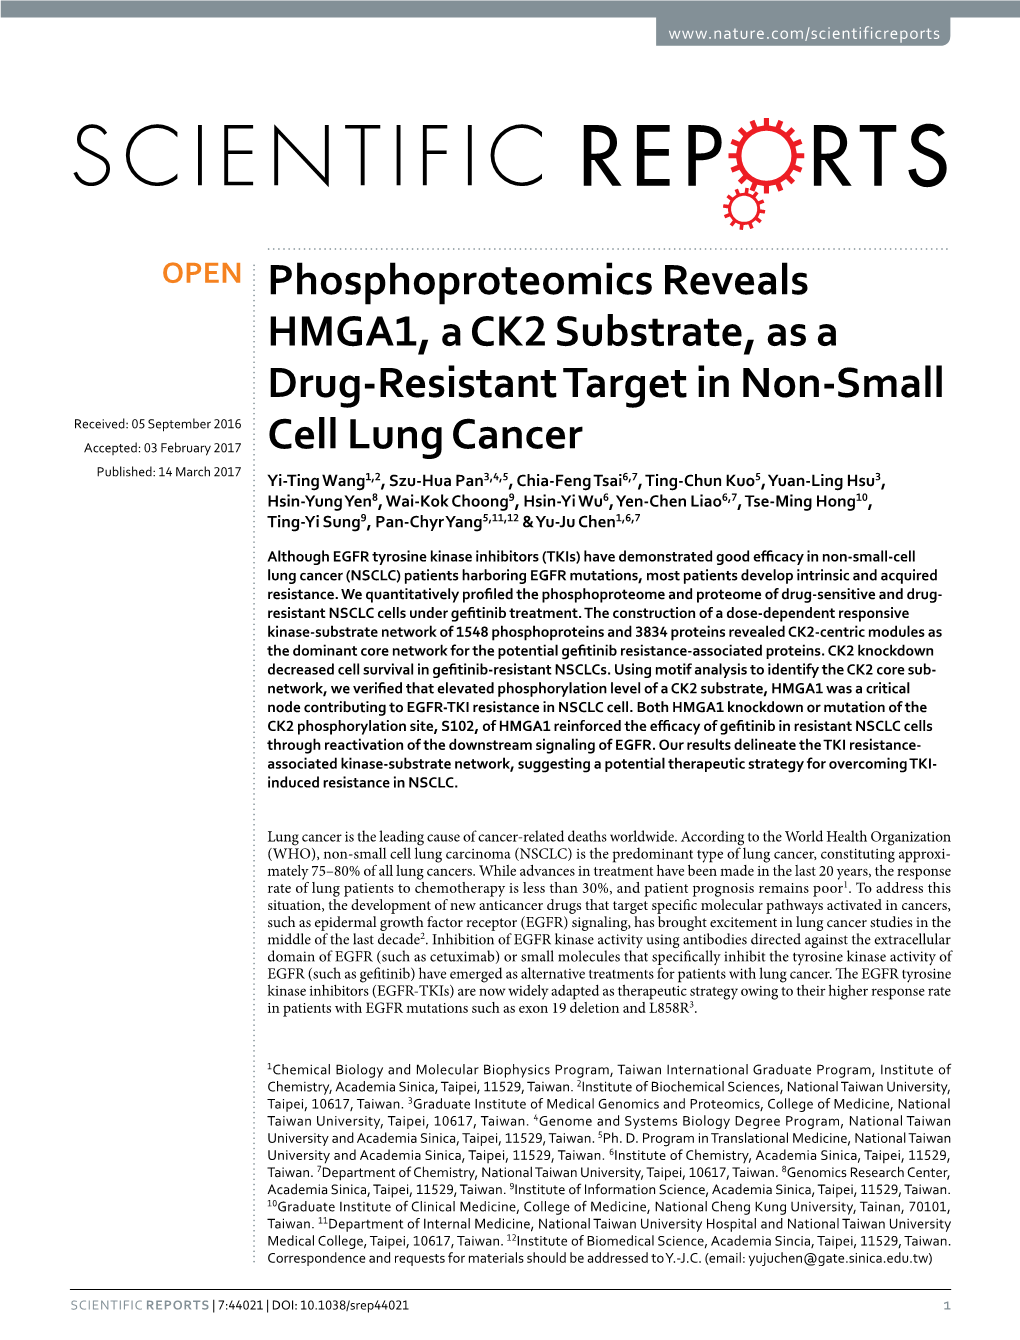 Phosphoproteomics Reveals HMGA1, a CK2 Substrate, As a Drug-Resistant Target in Non-Small Cell Lung Cancer